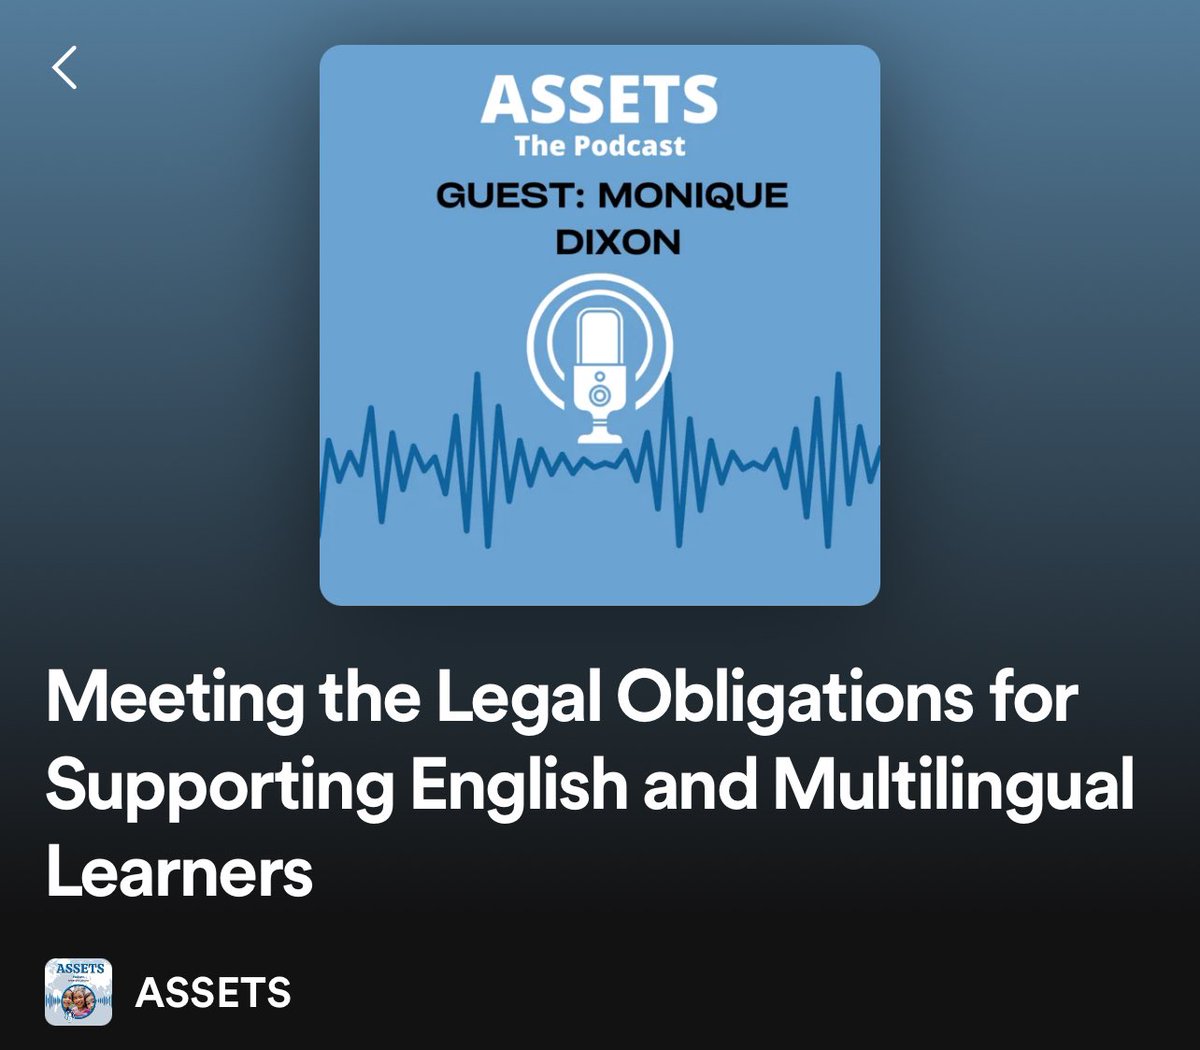 People ask about the legal obligations of supporting multilingual learners and their civil rights in education. This podcast episode answers a lot of common questions. open.spotify.com/episode/05mWcG…